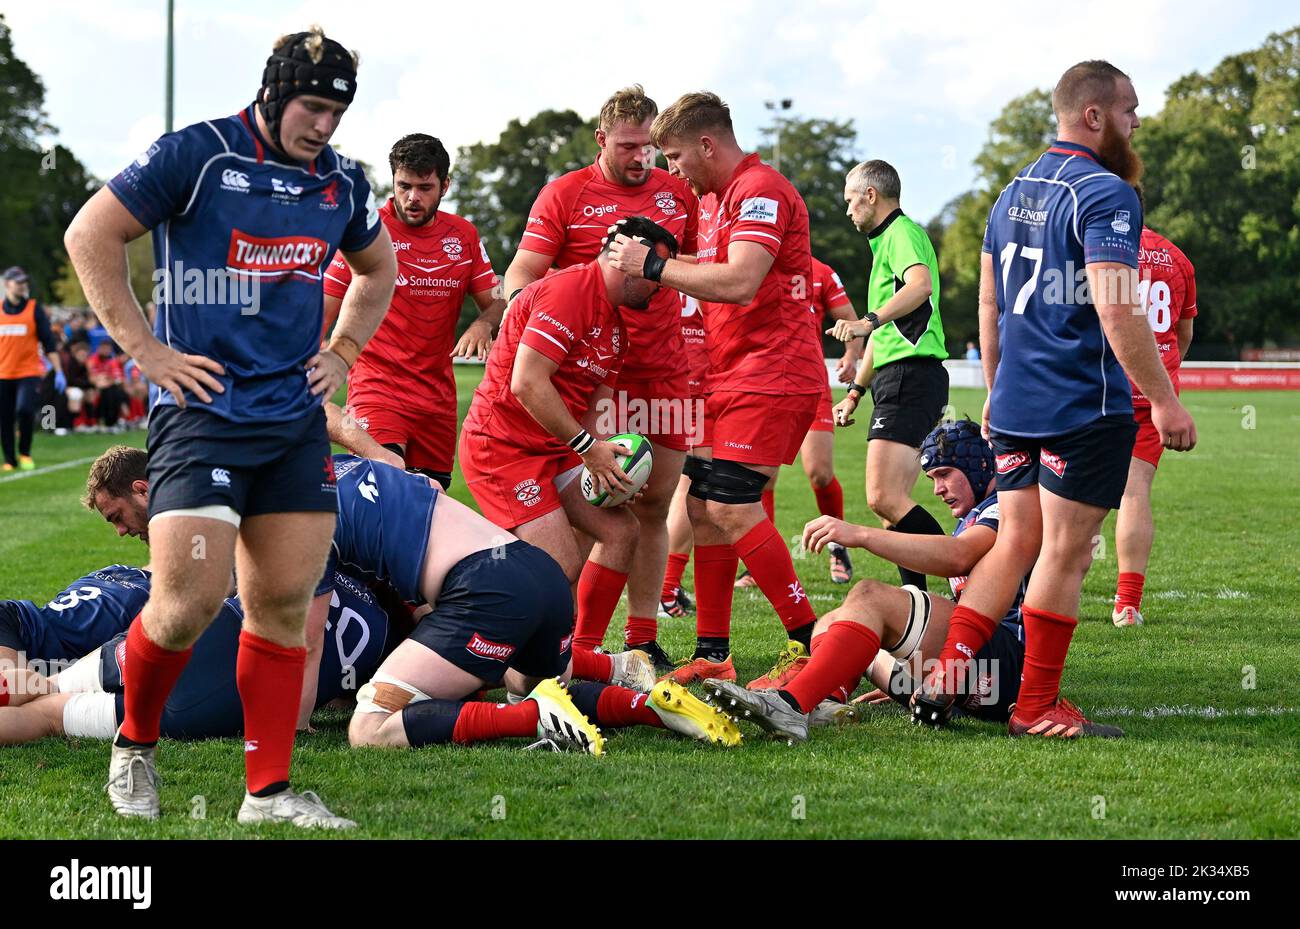 Richmond, United Kingdom. 24th Sep, 2022. Championship Rugby. London Scottish V Jersey Reds. The Richmond Athletic Ground. Richmond. The Jersey players congratulate try scorer James Hadfield (Jersey Reds, with ball) after he scores a try during the London Scottish V Jersey Reds championship rugby match. Credit: Sport In Pictures/Alamy Live News Stock Photo